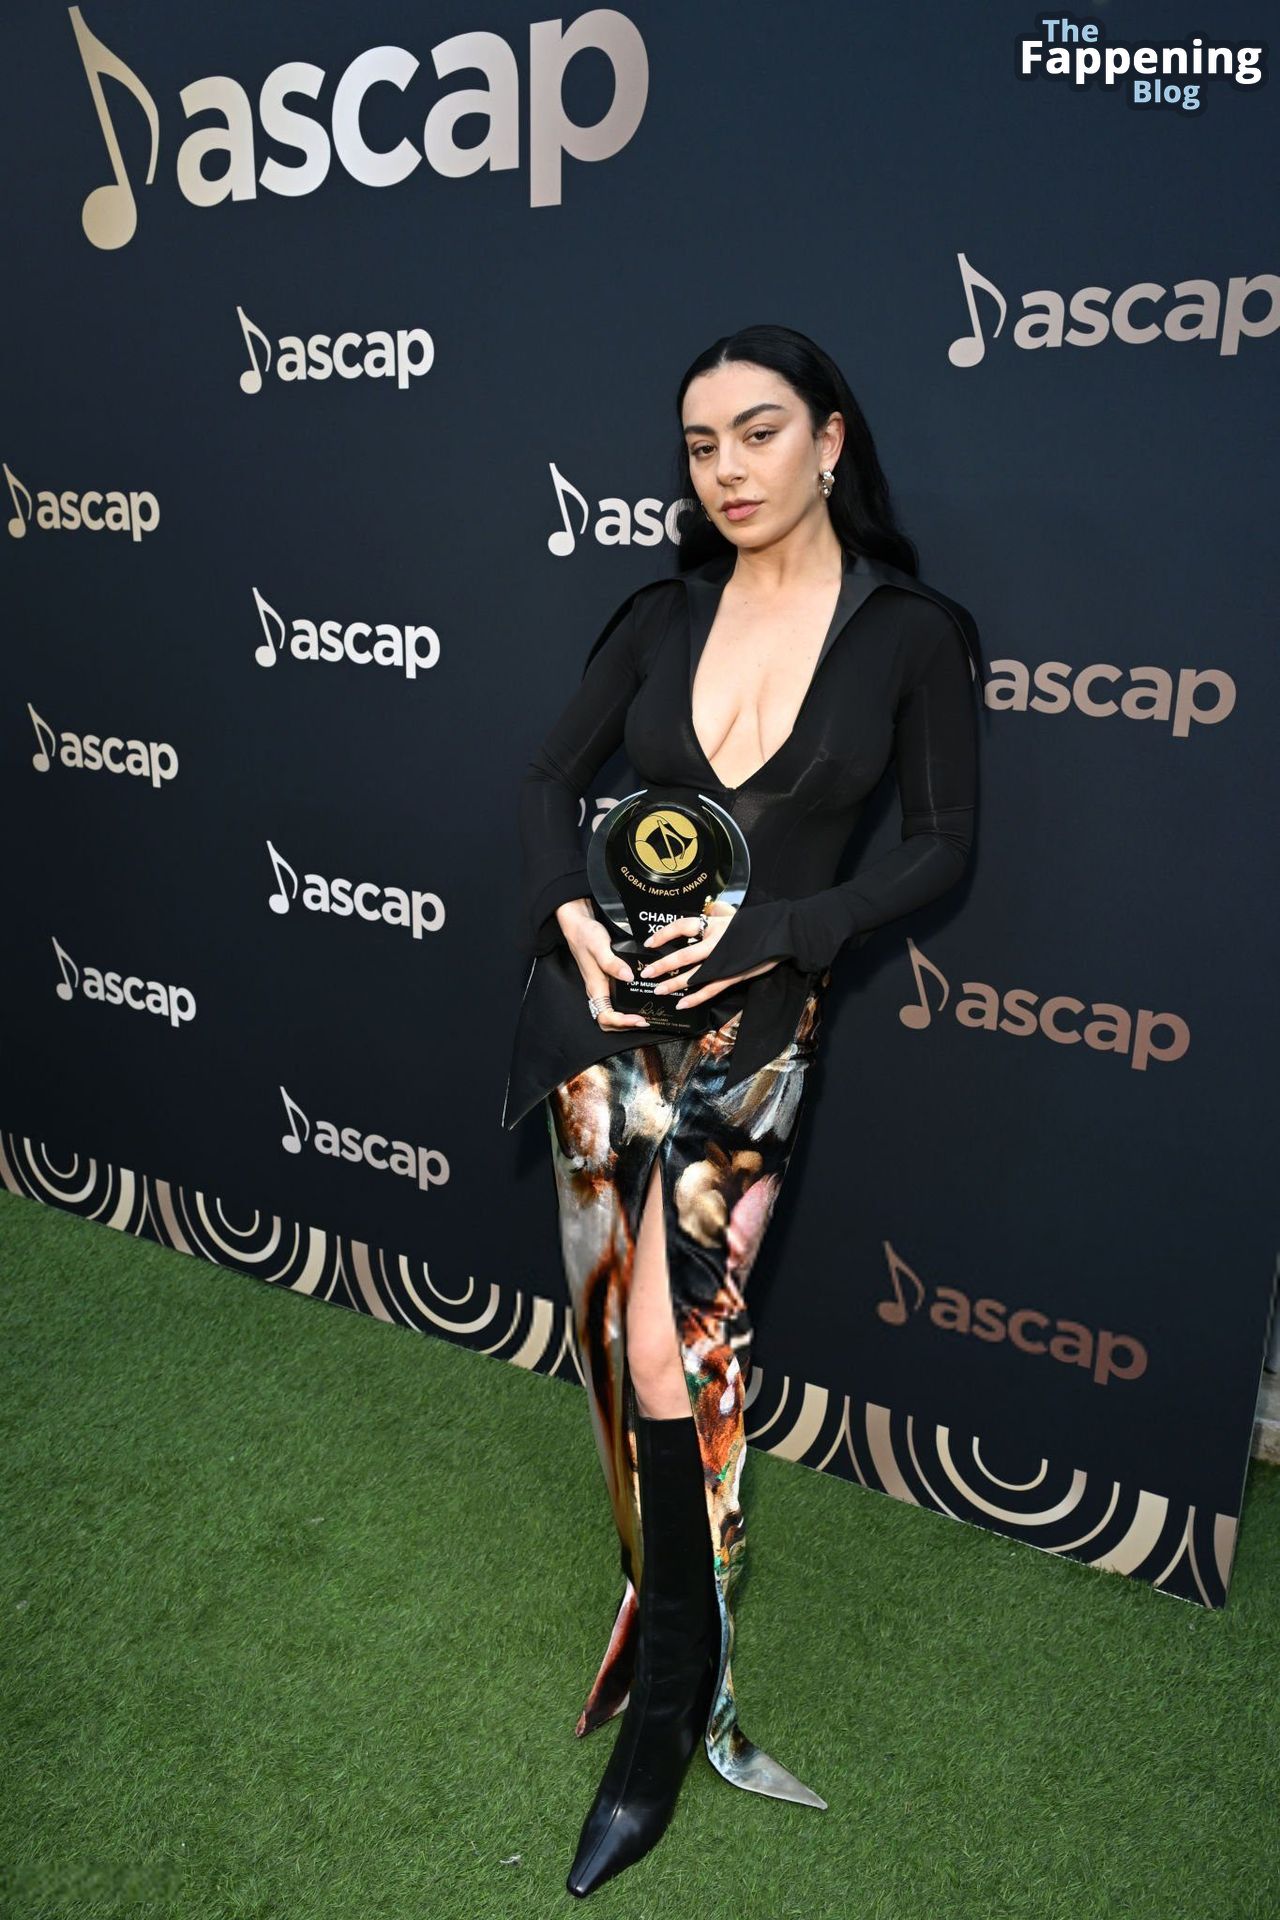 charli-xcx-braless-cleavage-ascap-pop-music-awards-5-thefappeningblog.com_.jpg